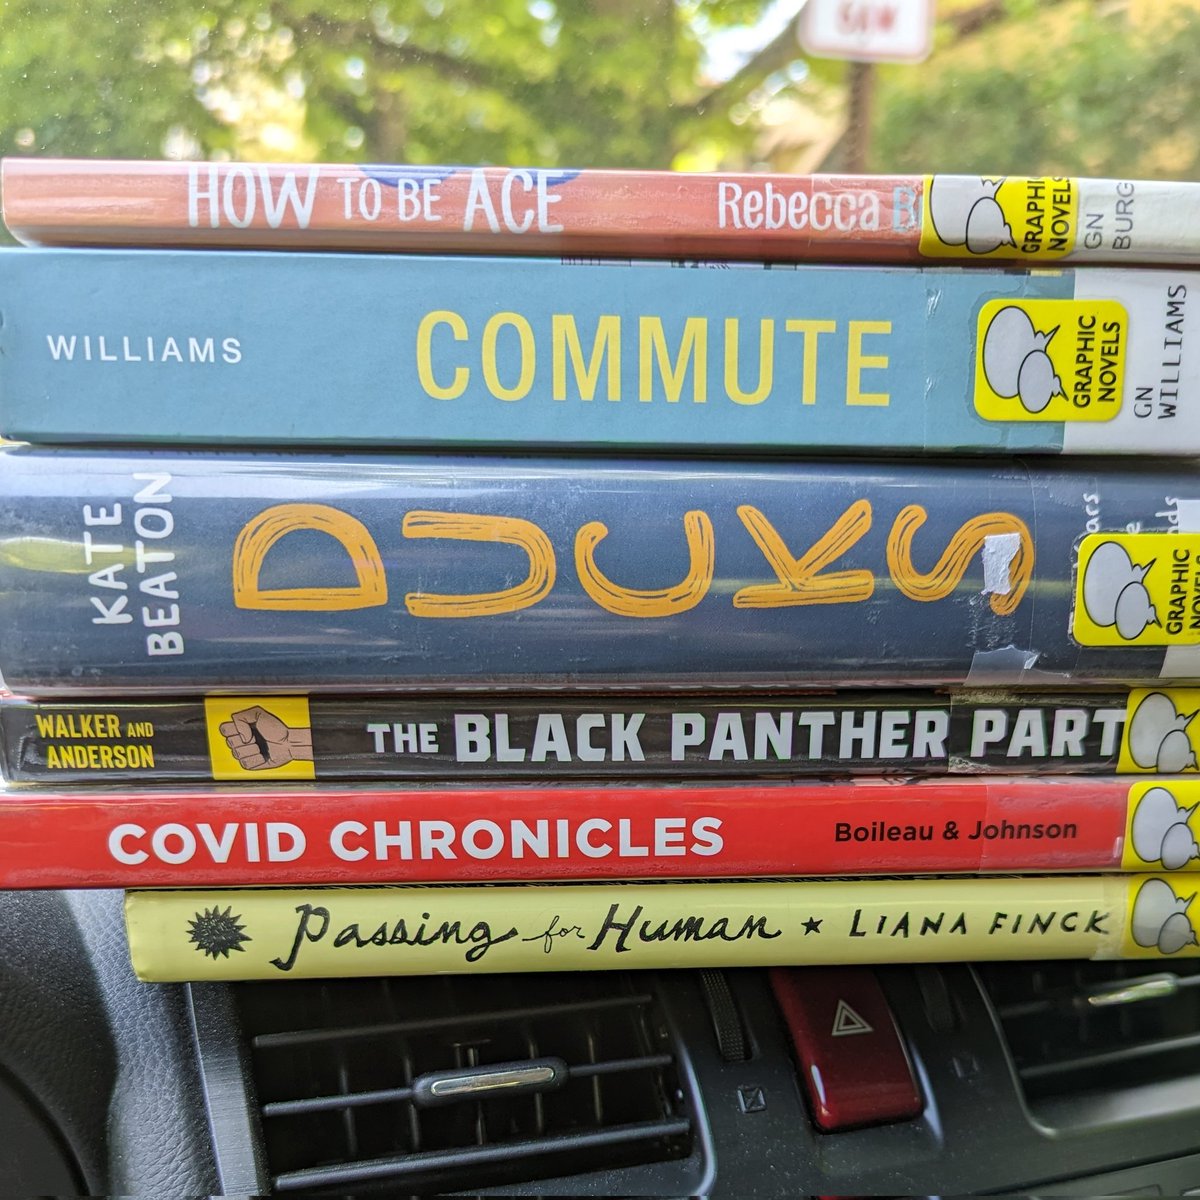 Comforting library haul today from @delcolibraries. My local branch has upped their comics collection!